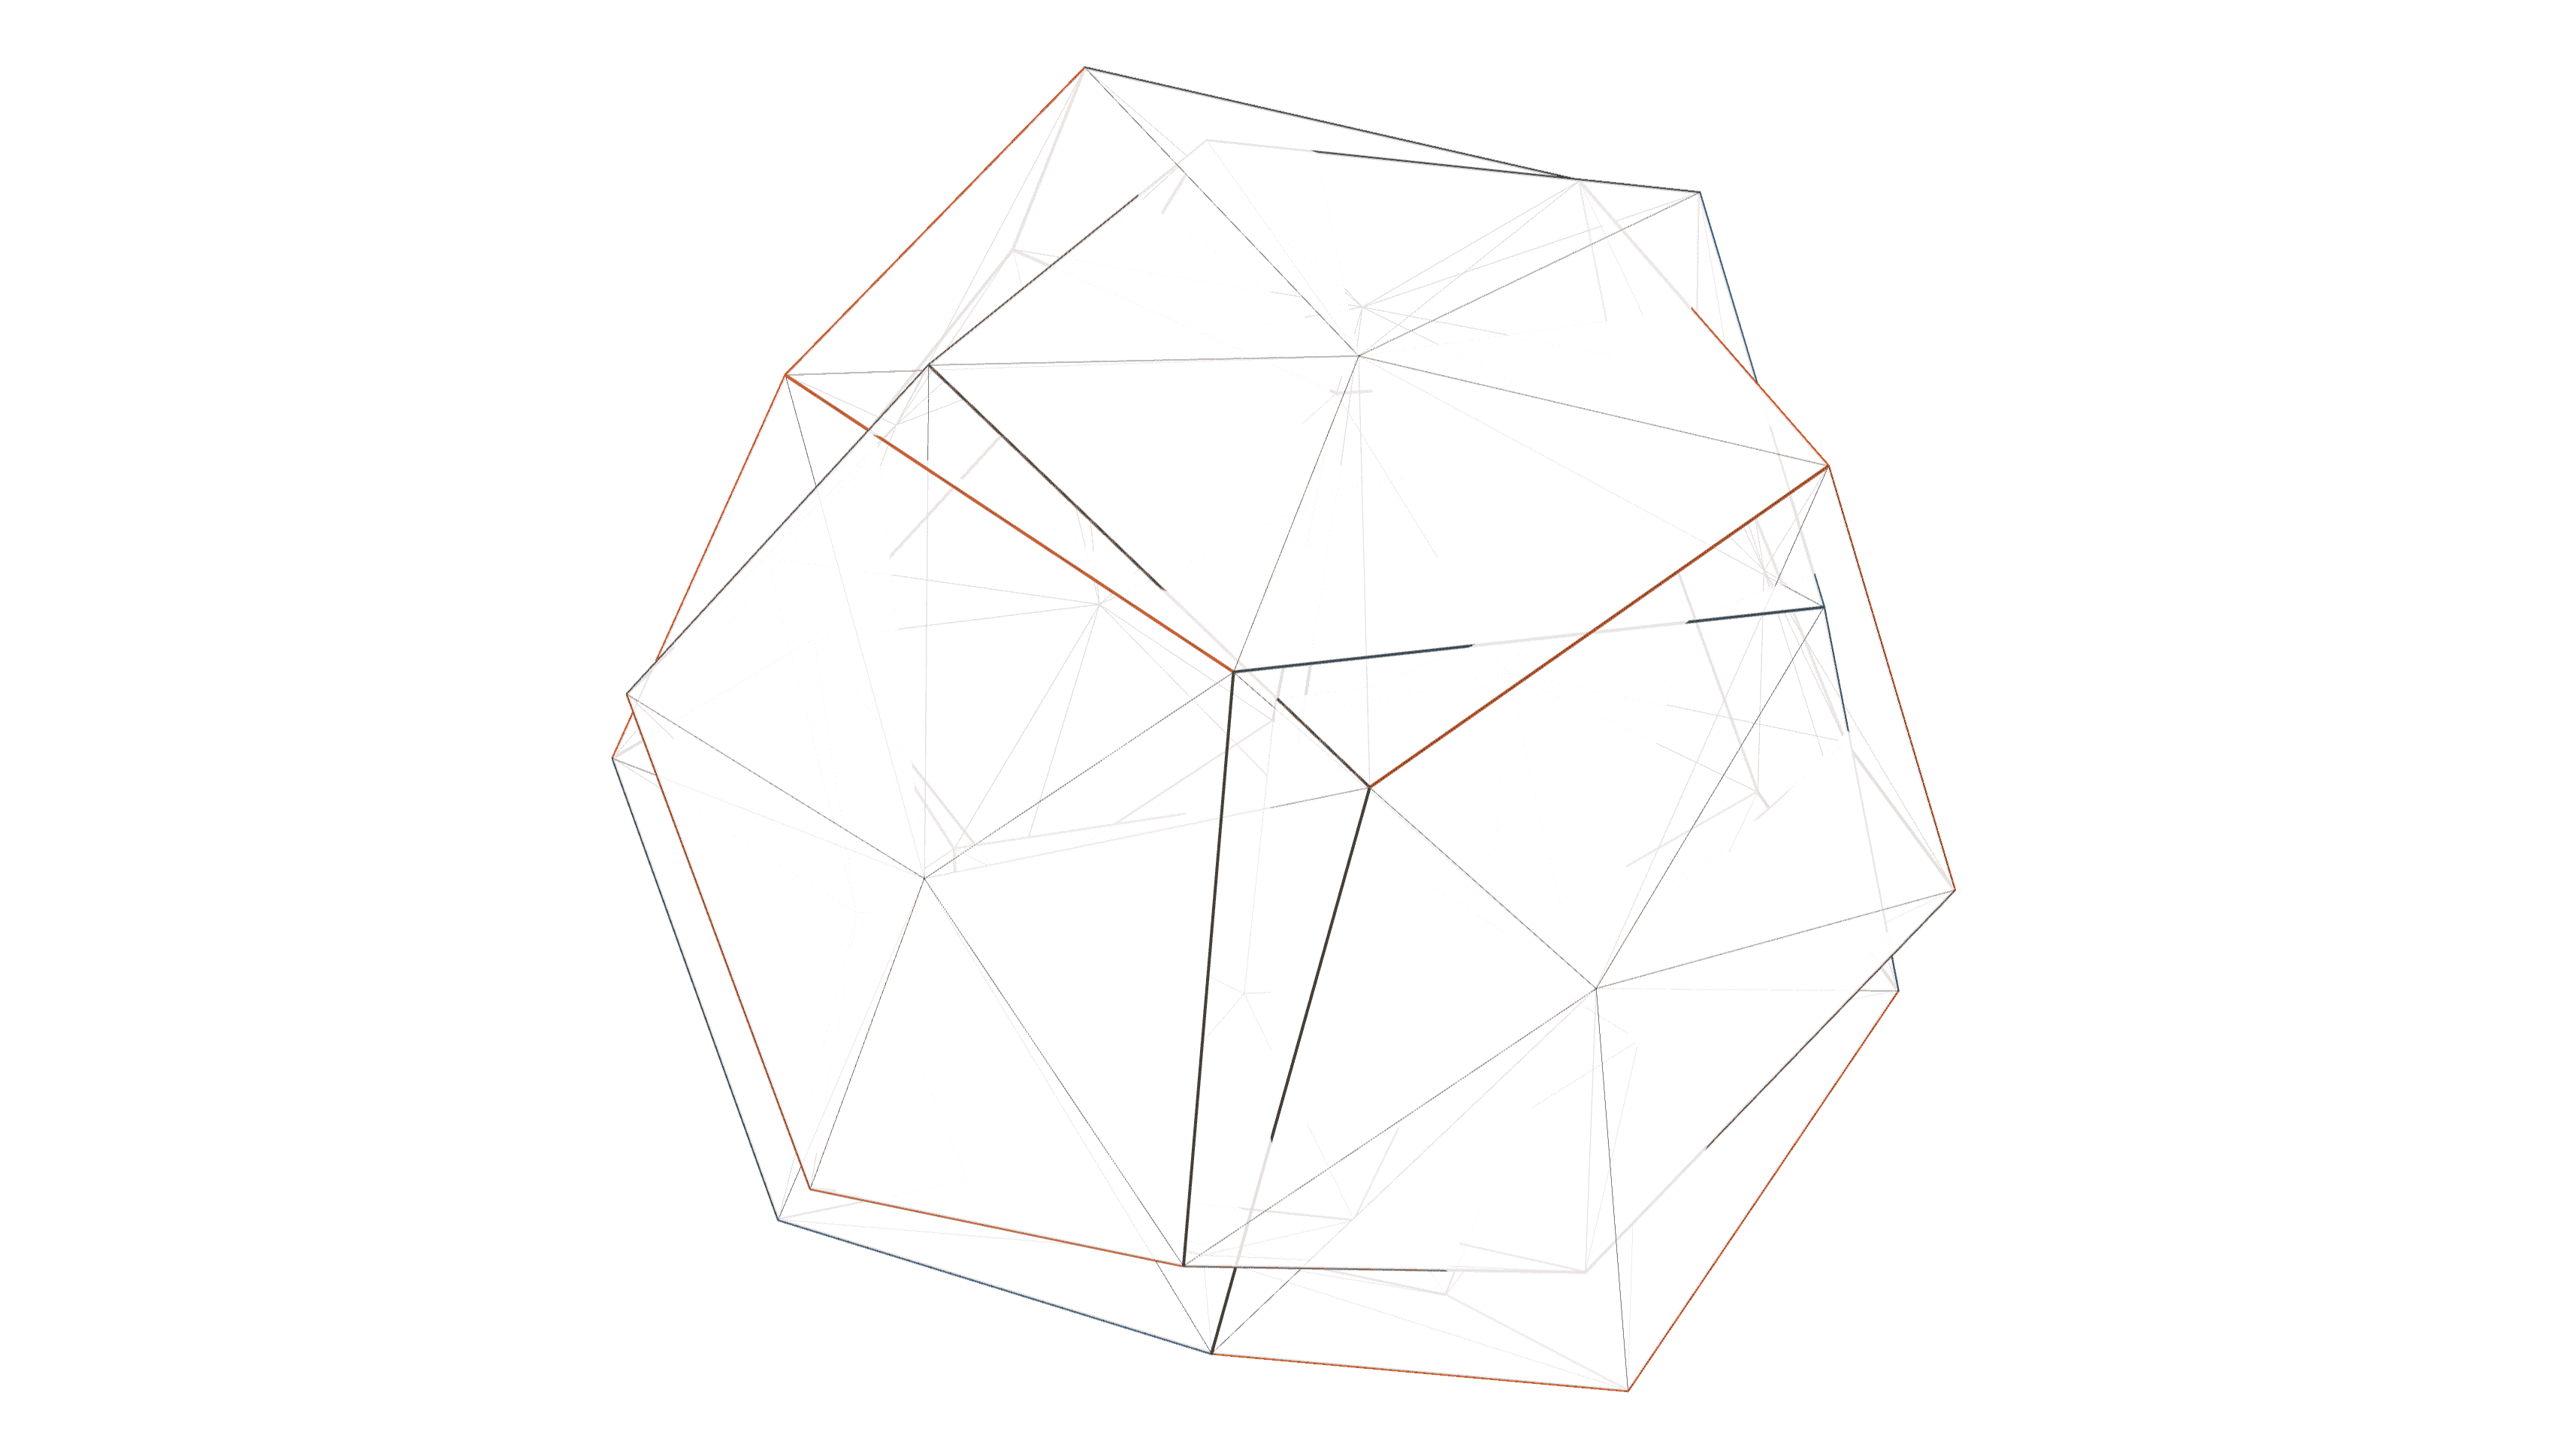 Thumbnail of Decagonal Double Cover Dodecahedron II